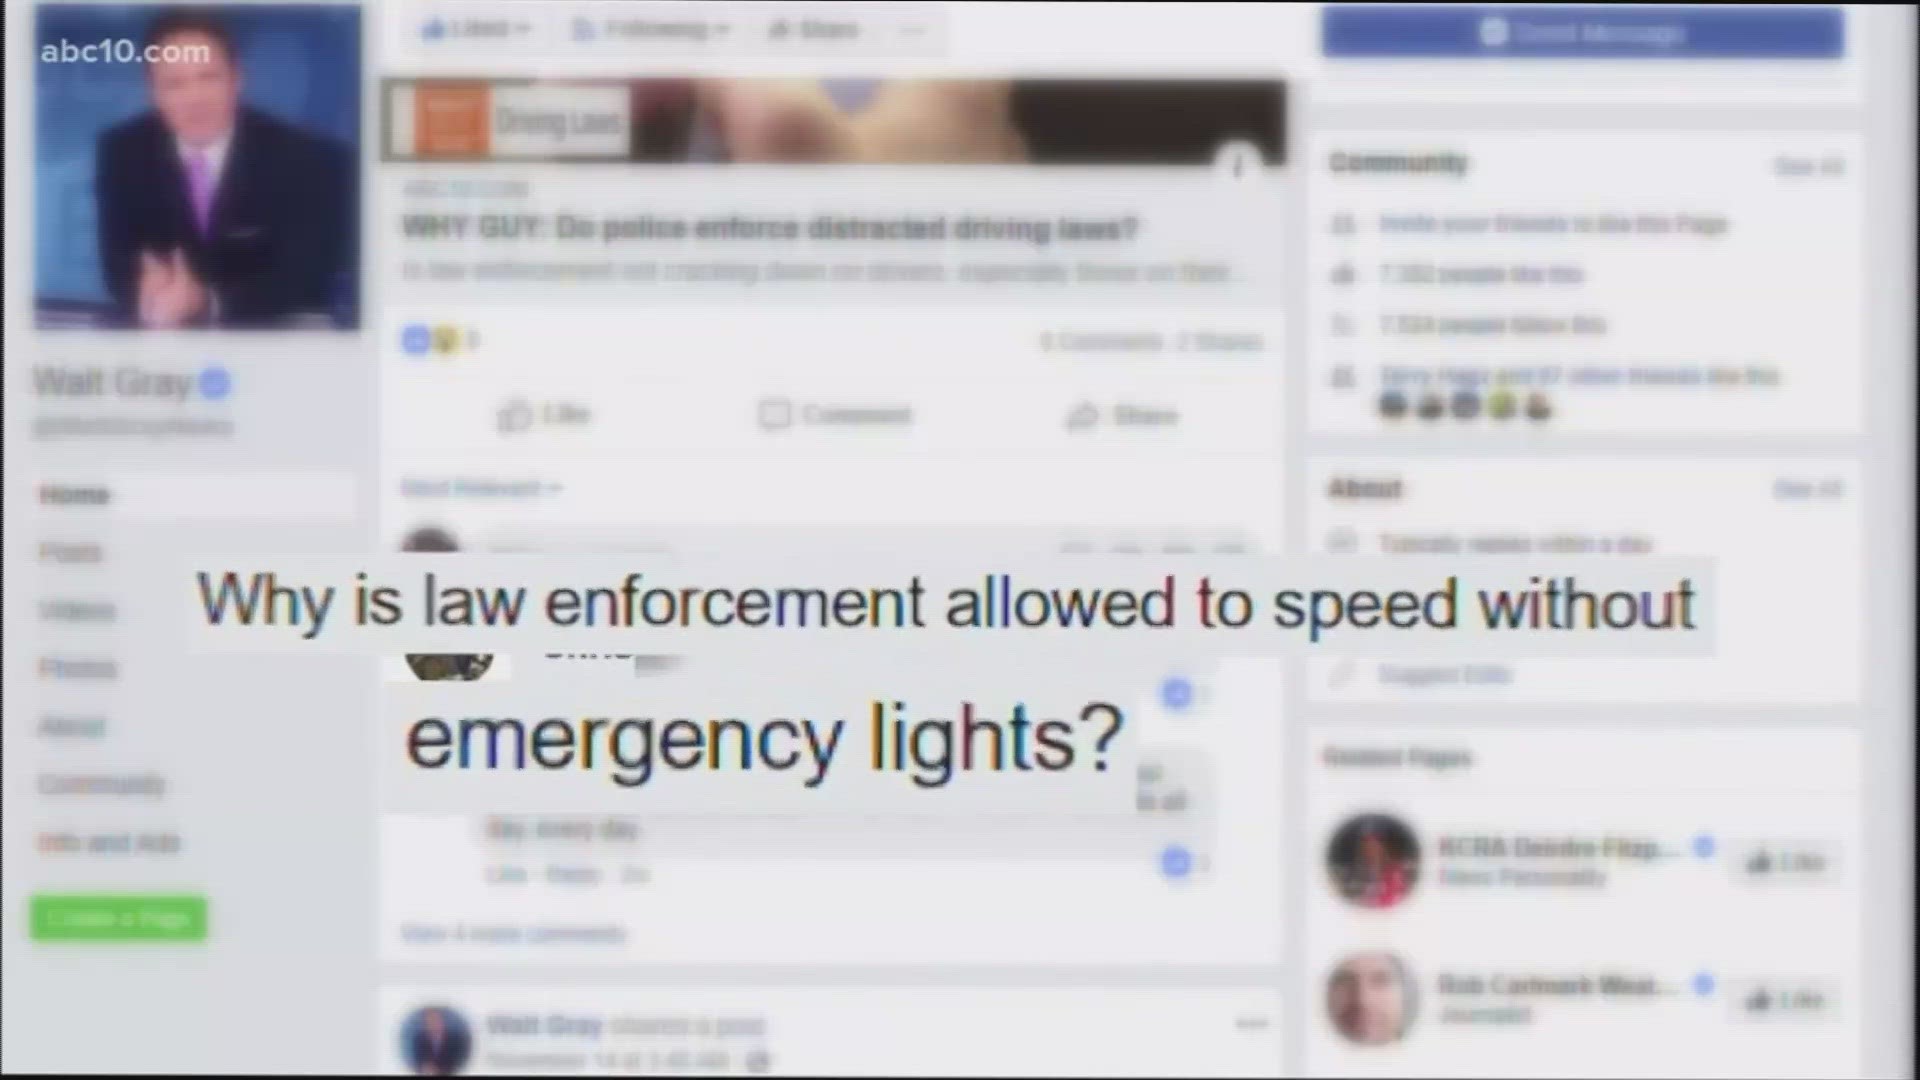 What situations would law enforcement speed without emergency lights?